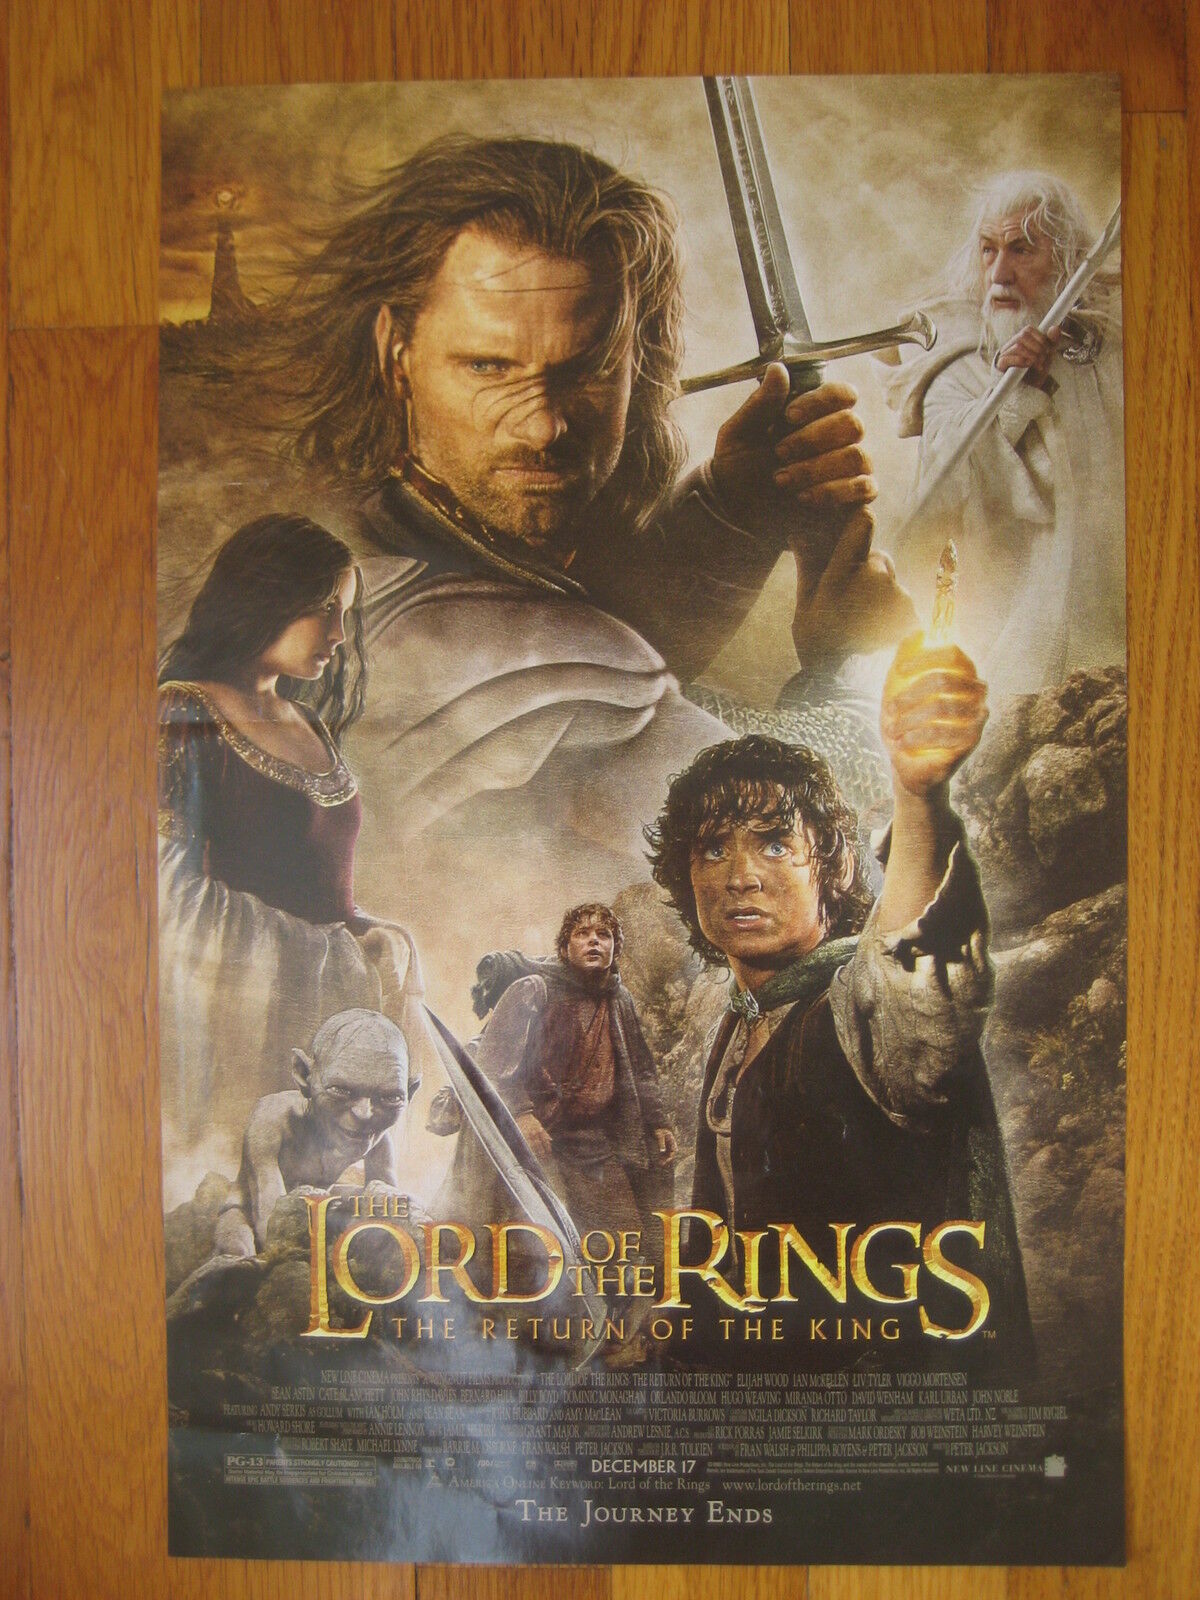 The Lord of the Rings Return of the King mini MOVIE POSTER 17 x 11 classic vtg